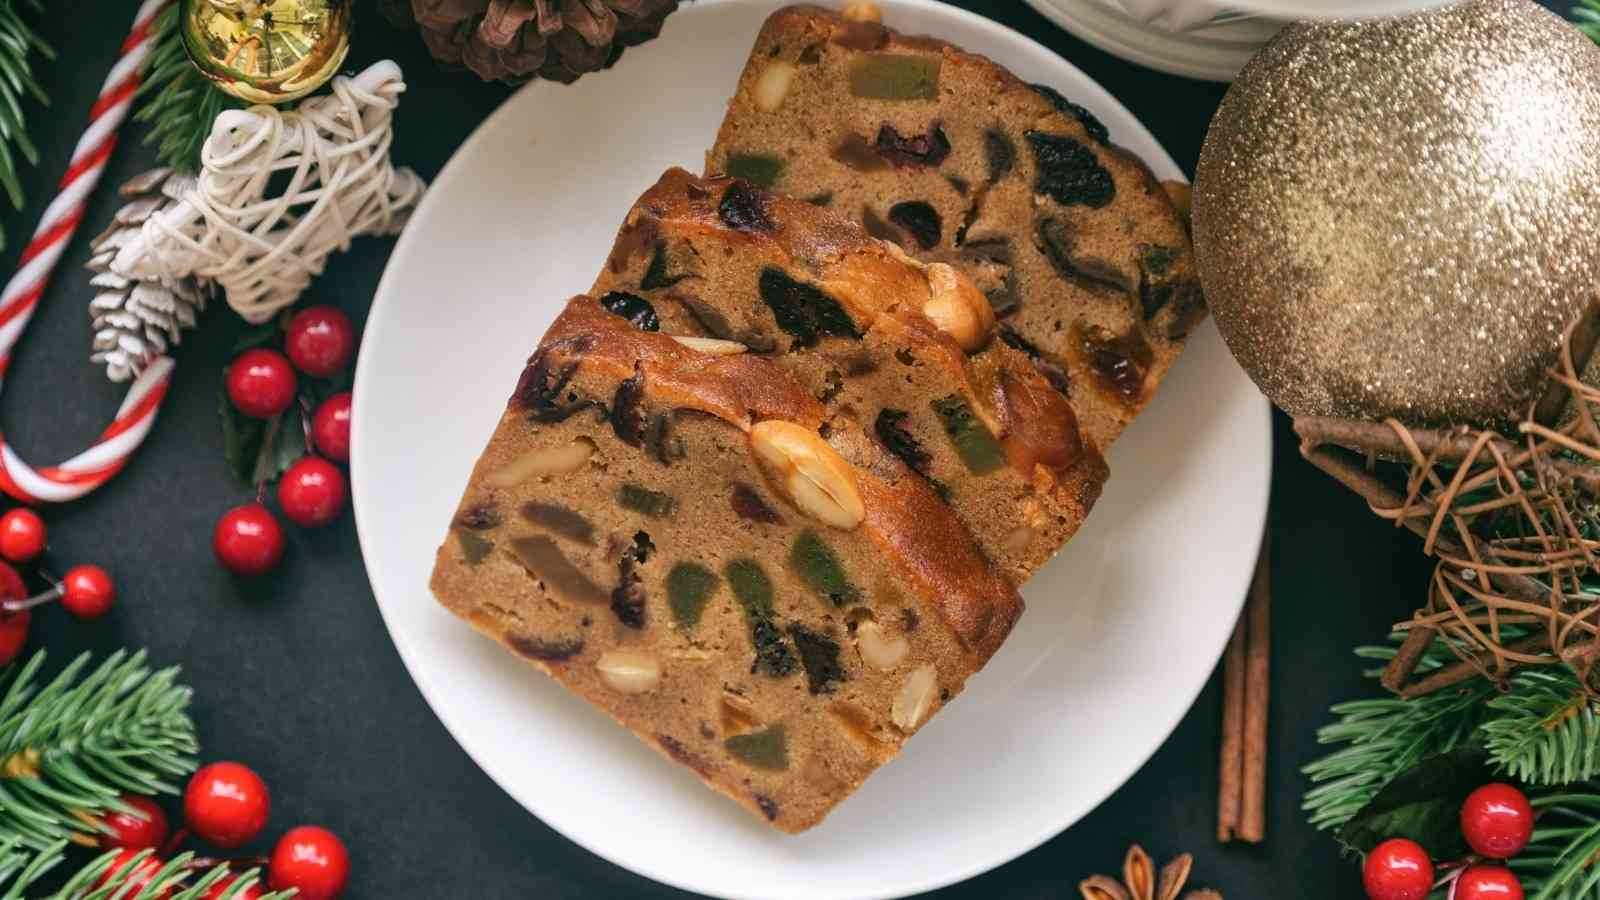 Fruitcake Toss Day 2023: Date, History, Tips for Making the Perfect Fruitcake